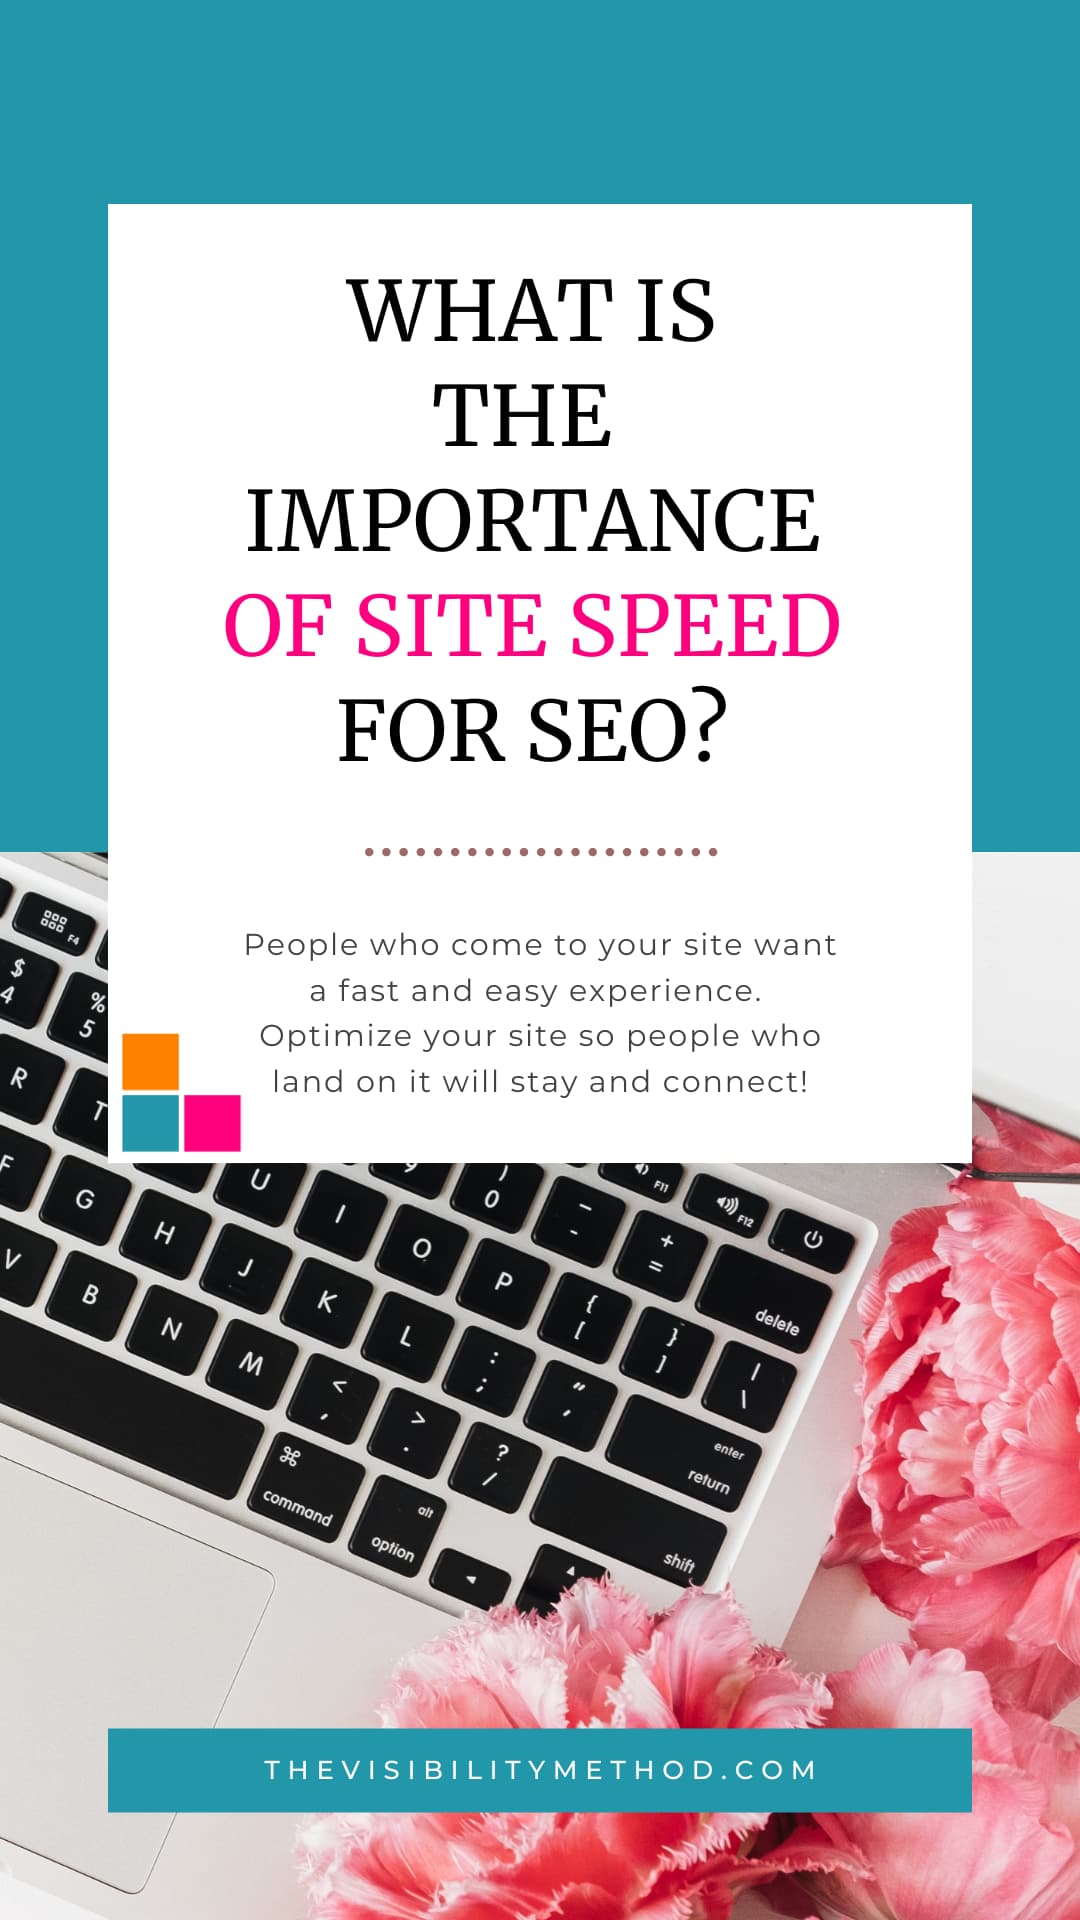 Importance of site speed for SEO